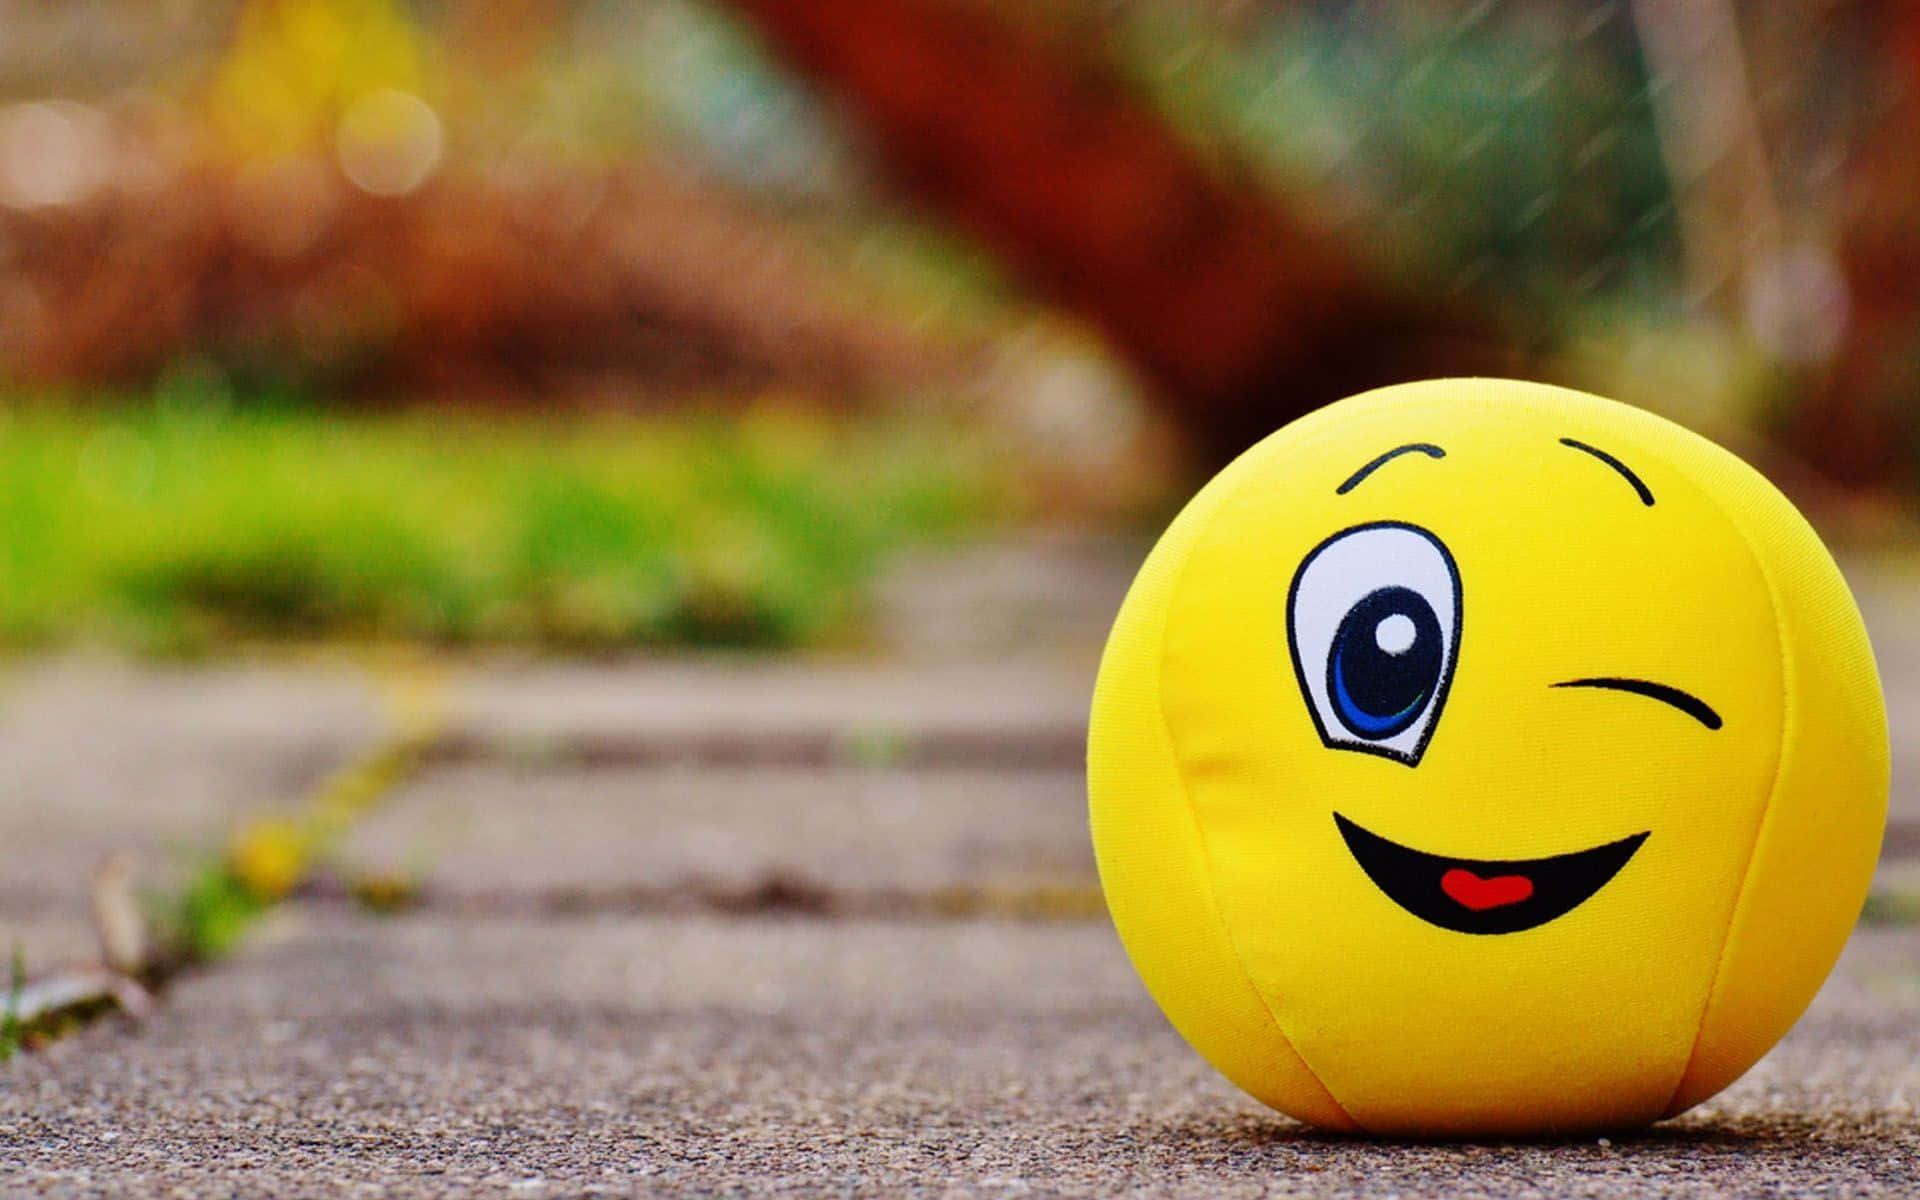 Have a Smiley Day!